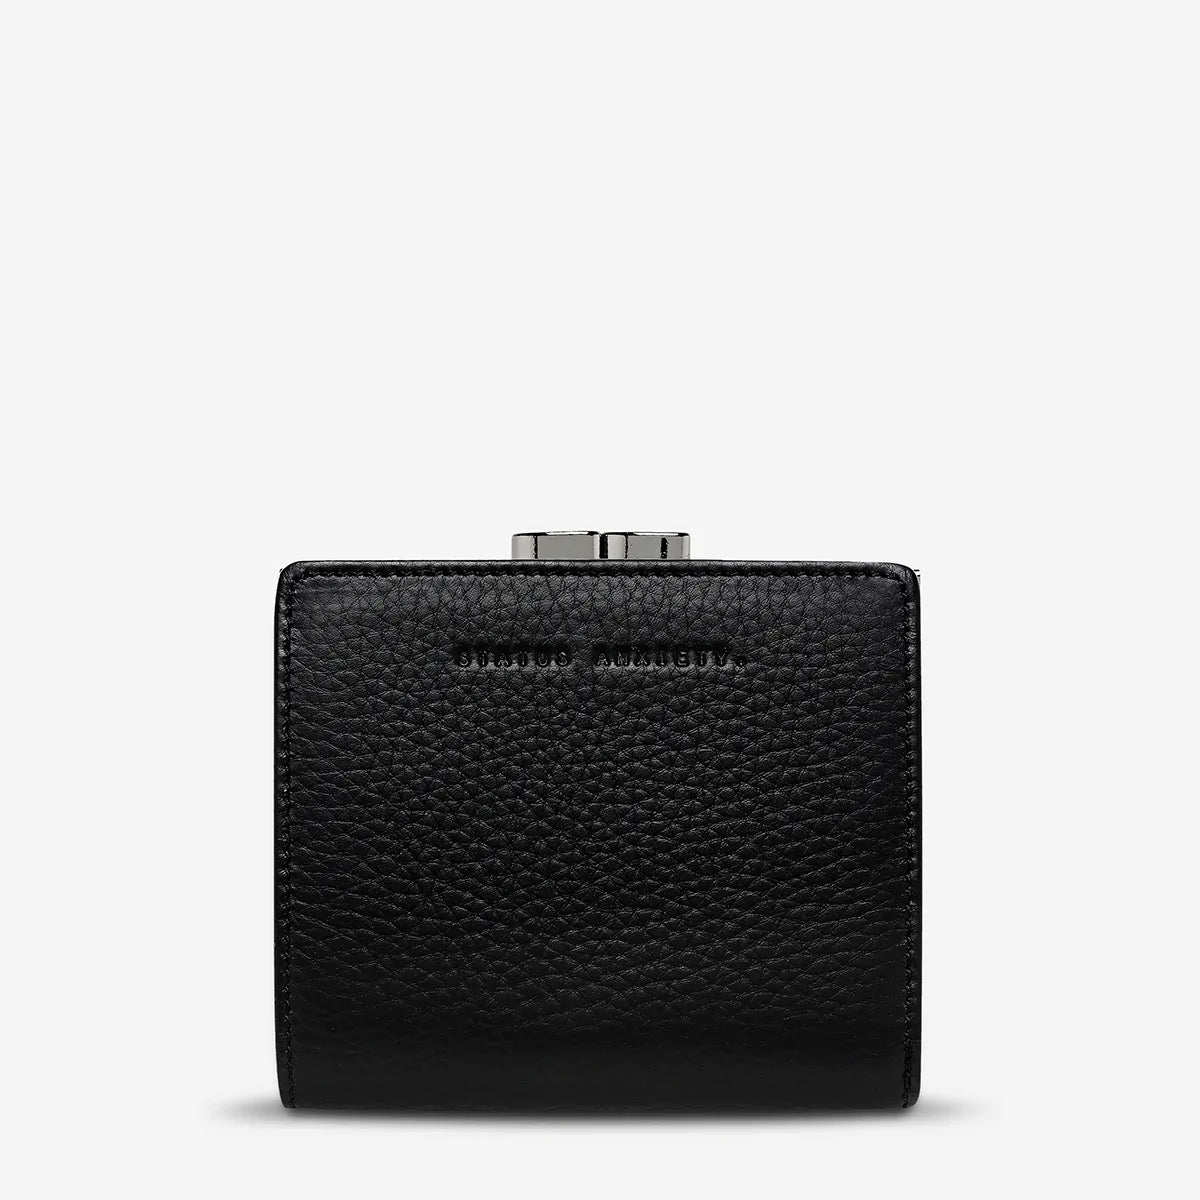 Status Anxiety - As You Were Wallet - Black